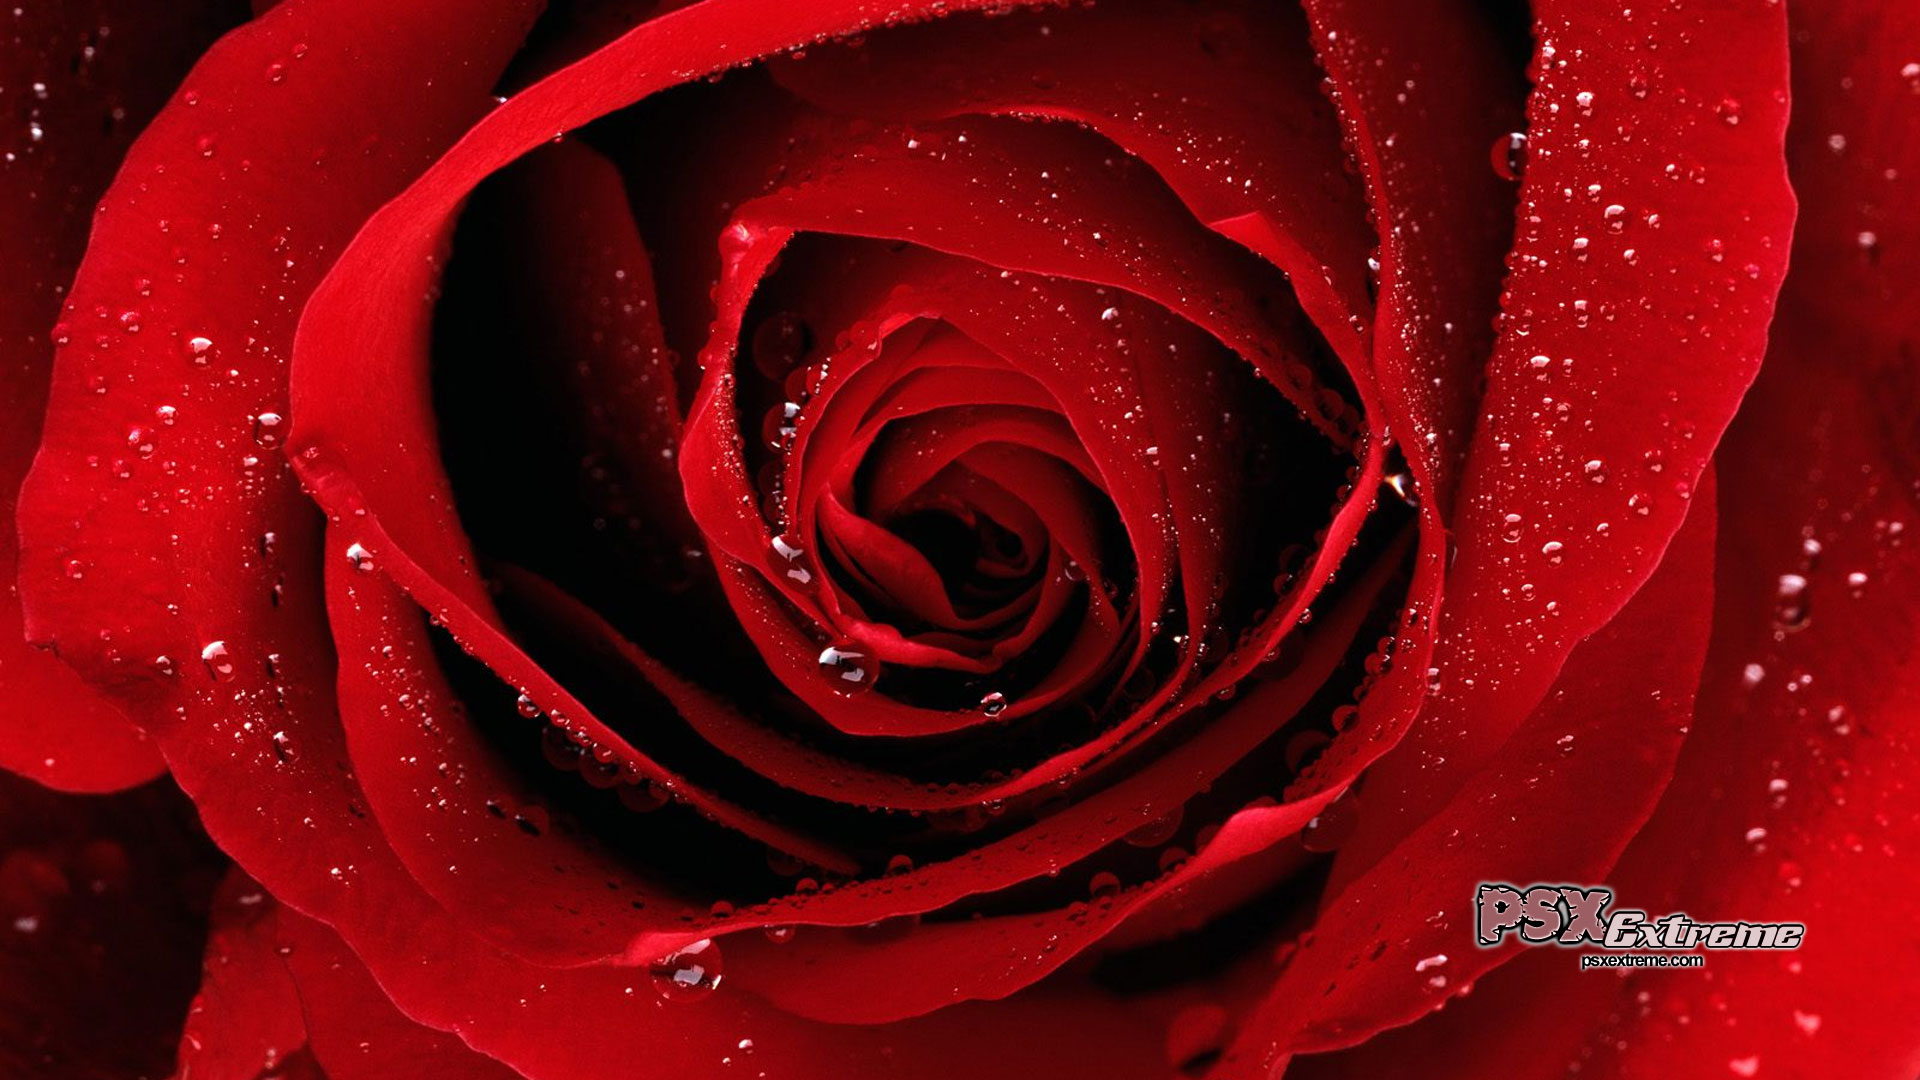 Red Roses Wallpapers HD A39 cute